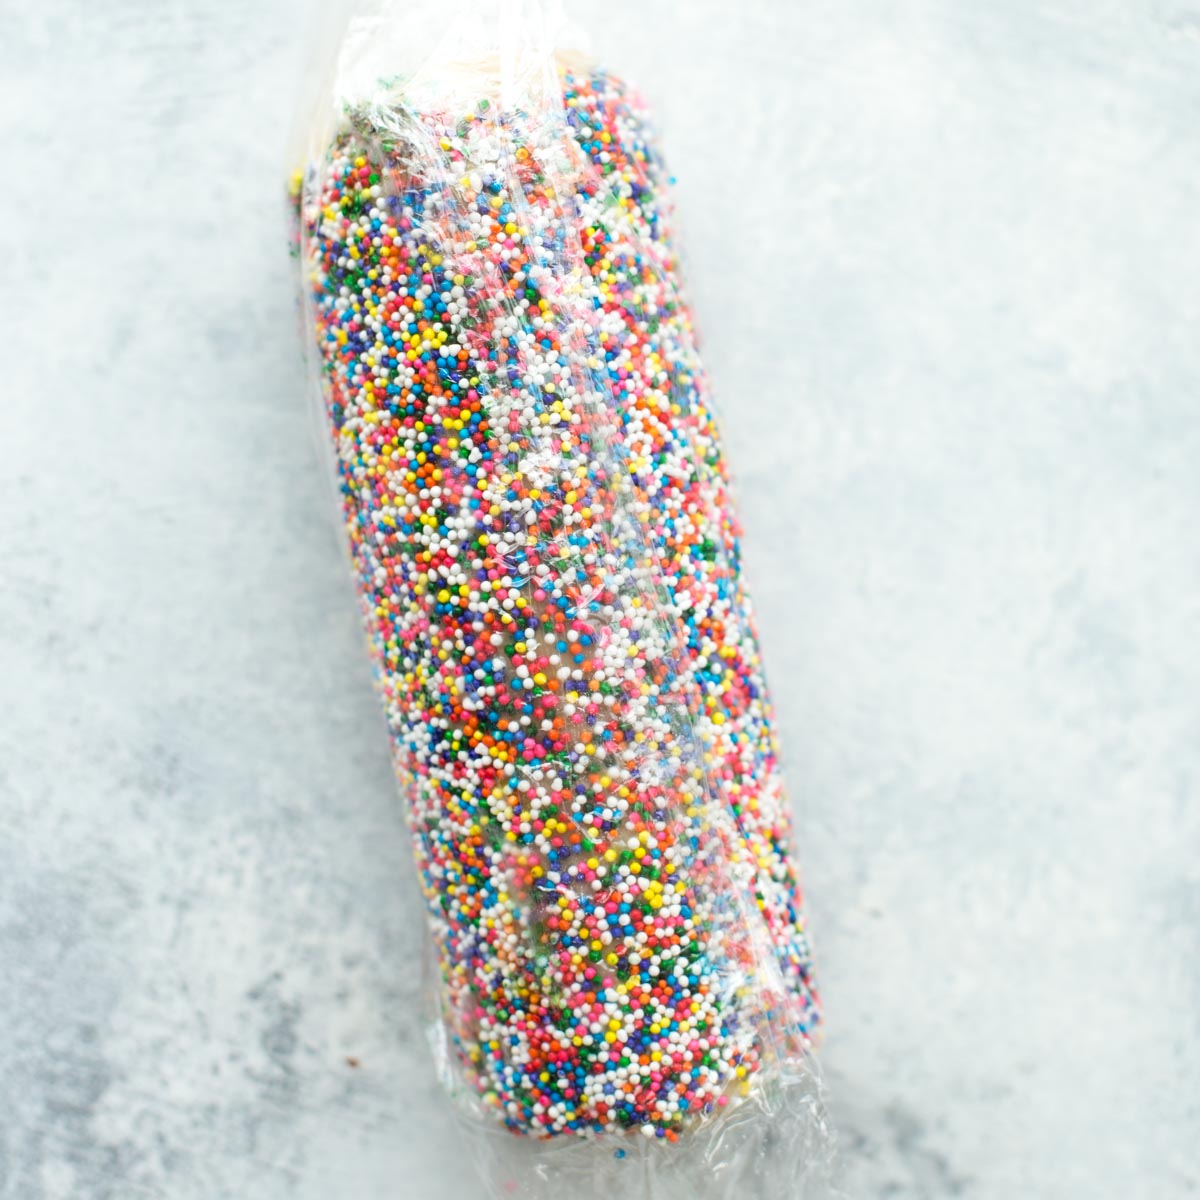 Cookie dough log with sprinkles on the outside wrapped in plastic wrap for St. Patrick's Day slice and bake cookies